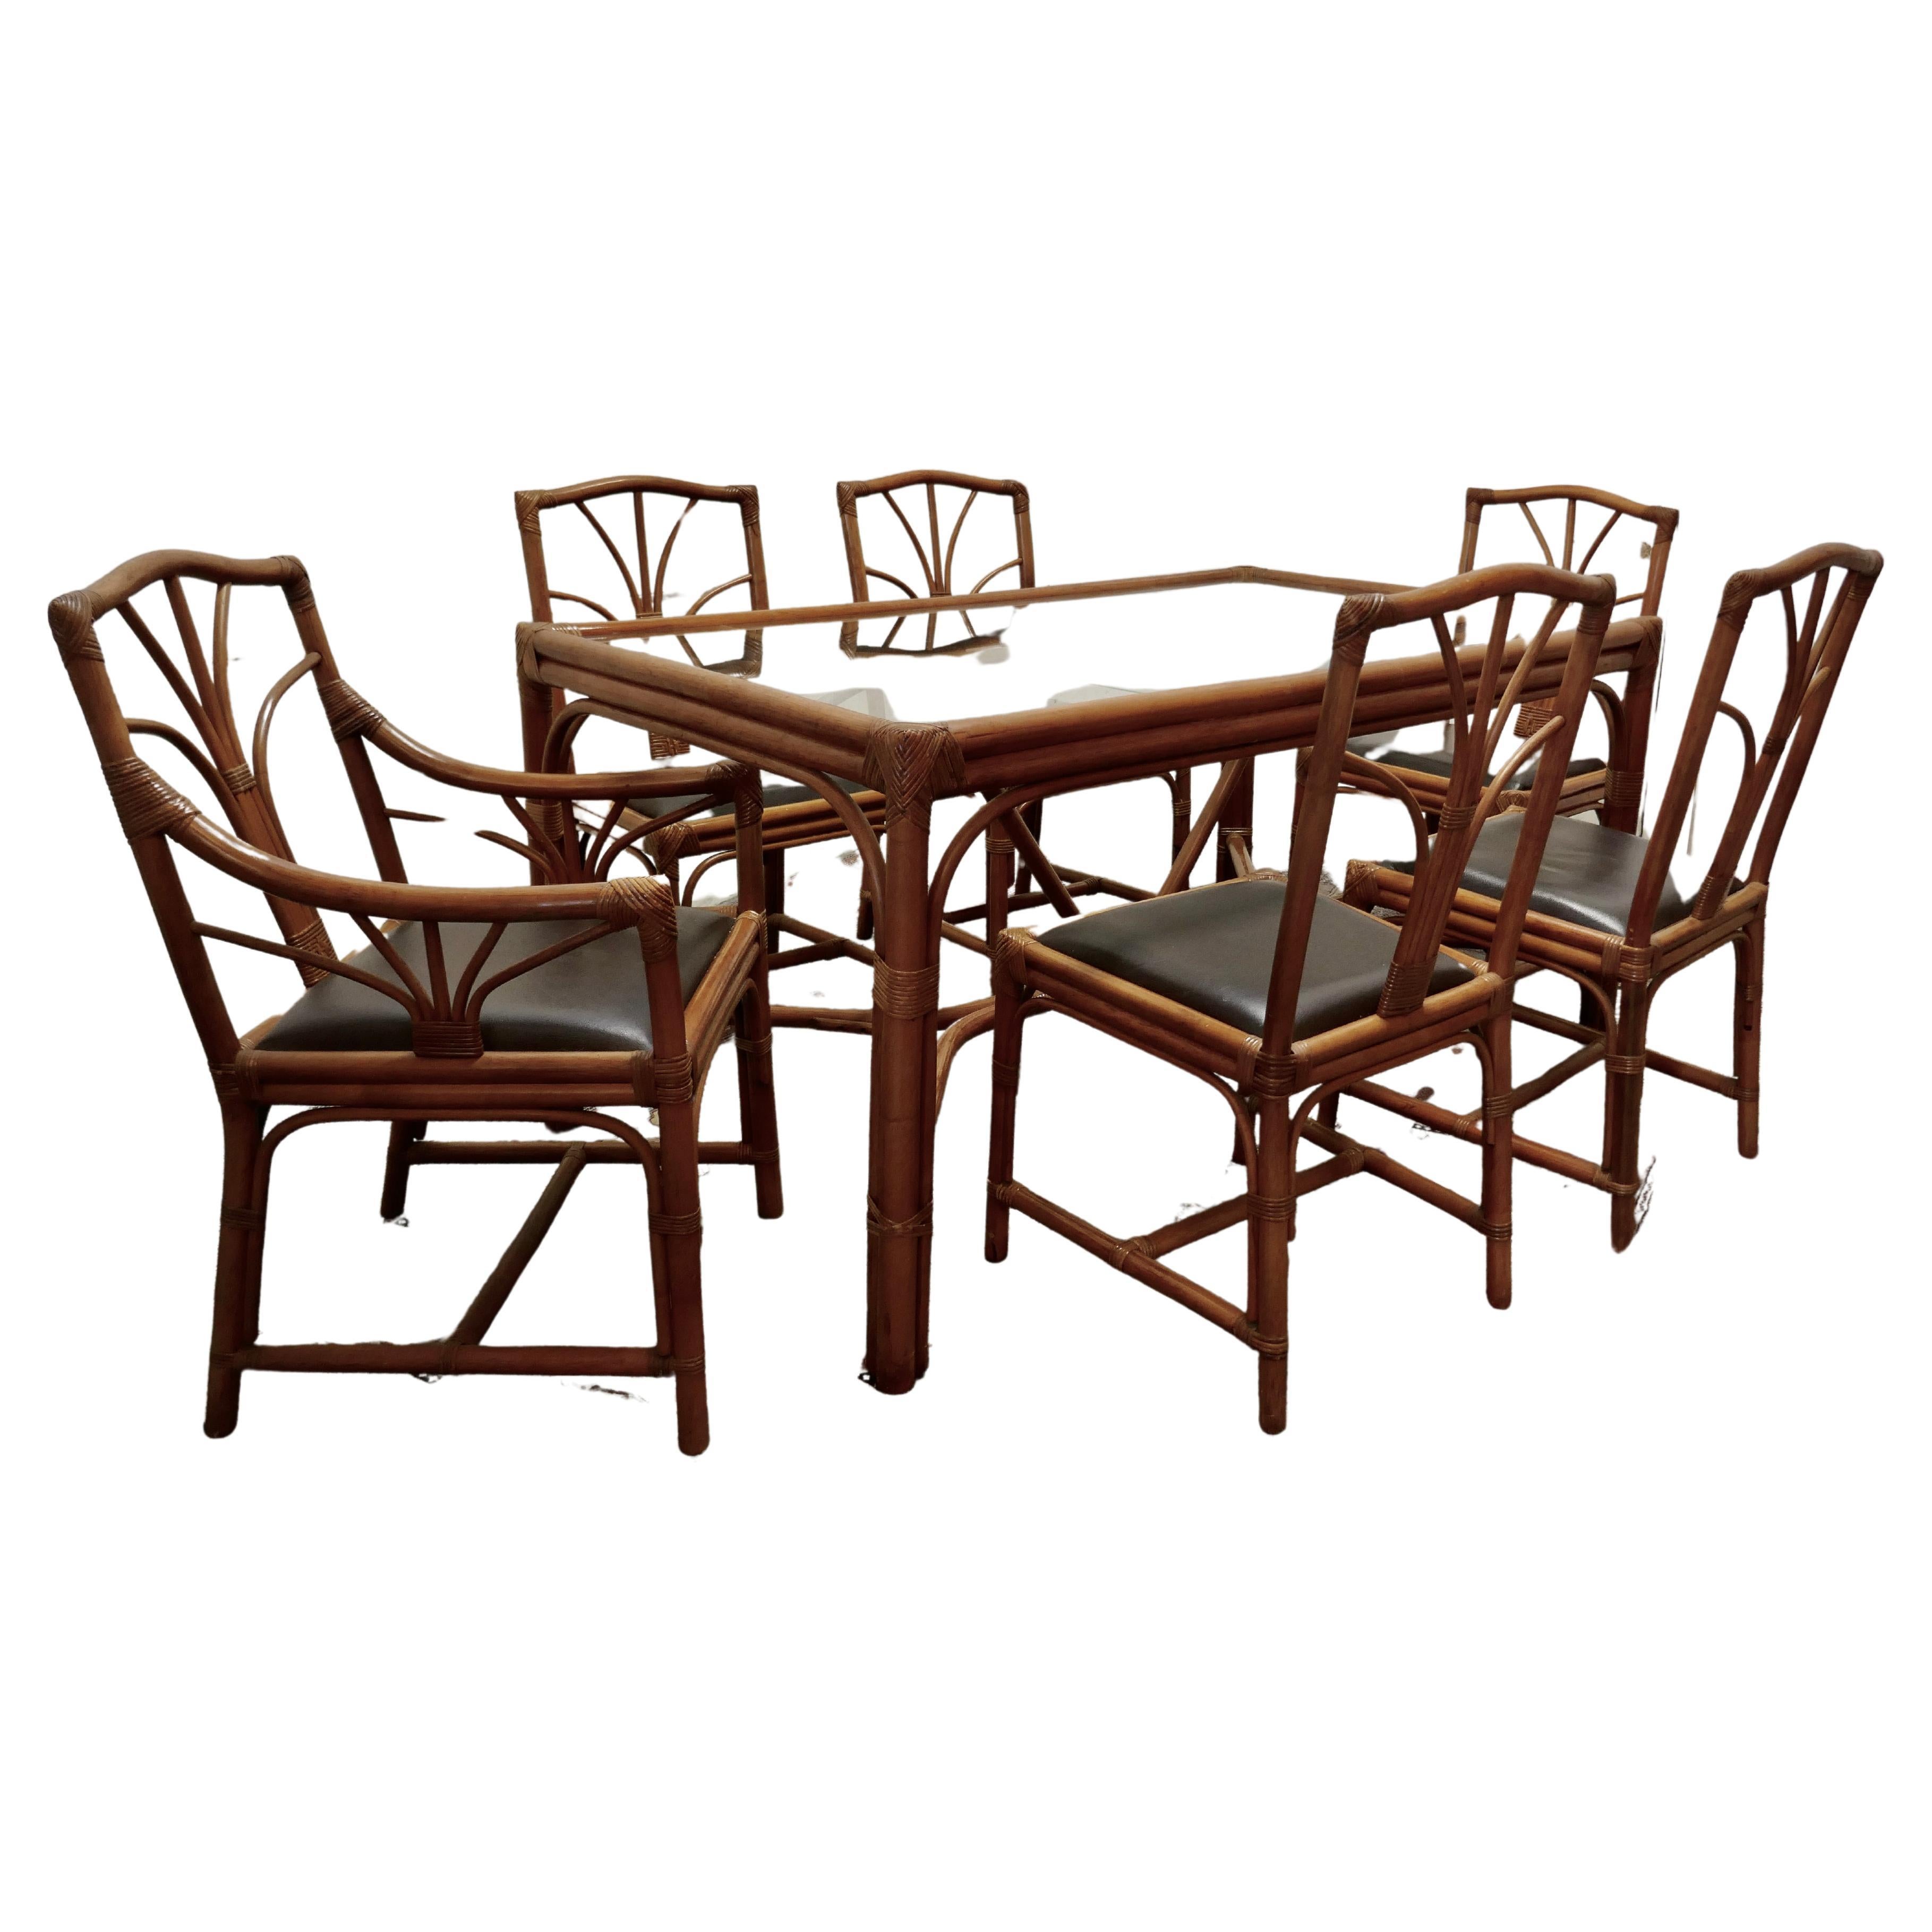 Regency Style Simulated Bamboo Dining Table and 6 Chairs   